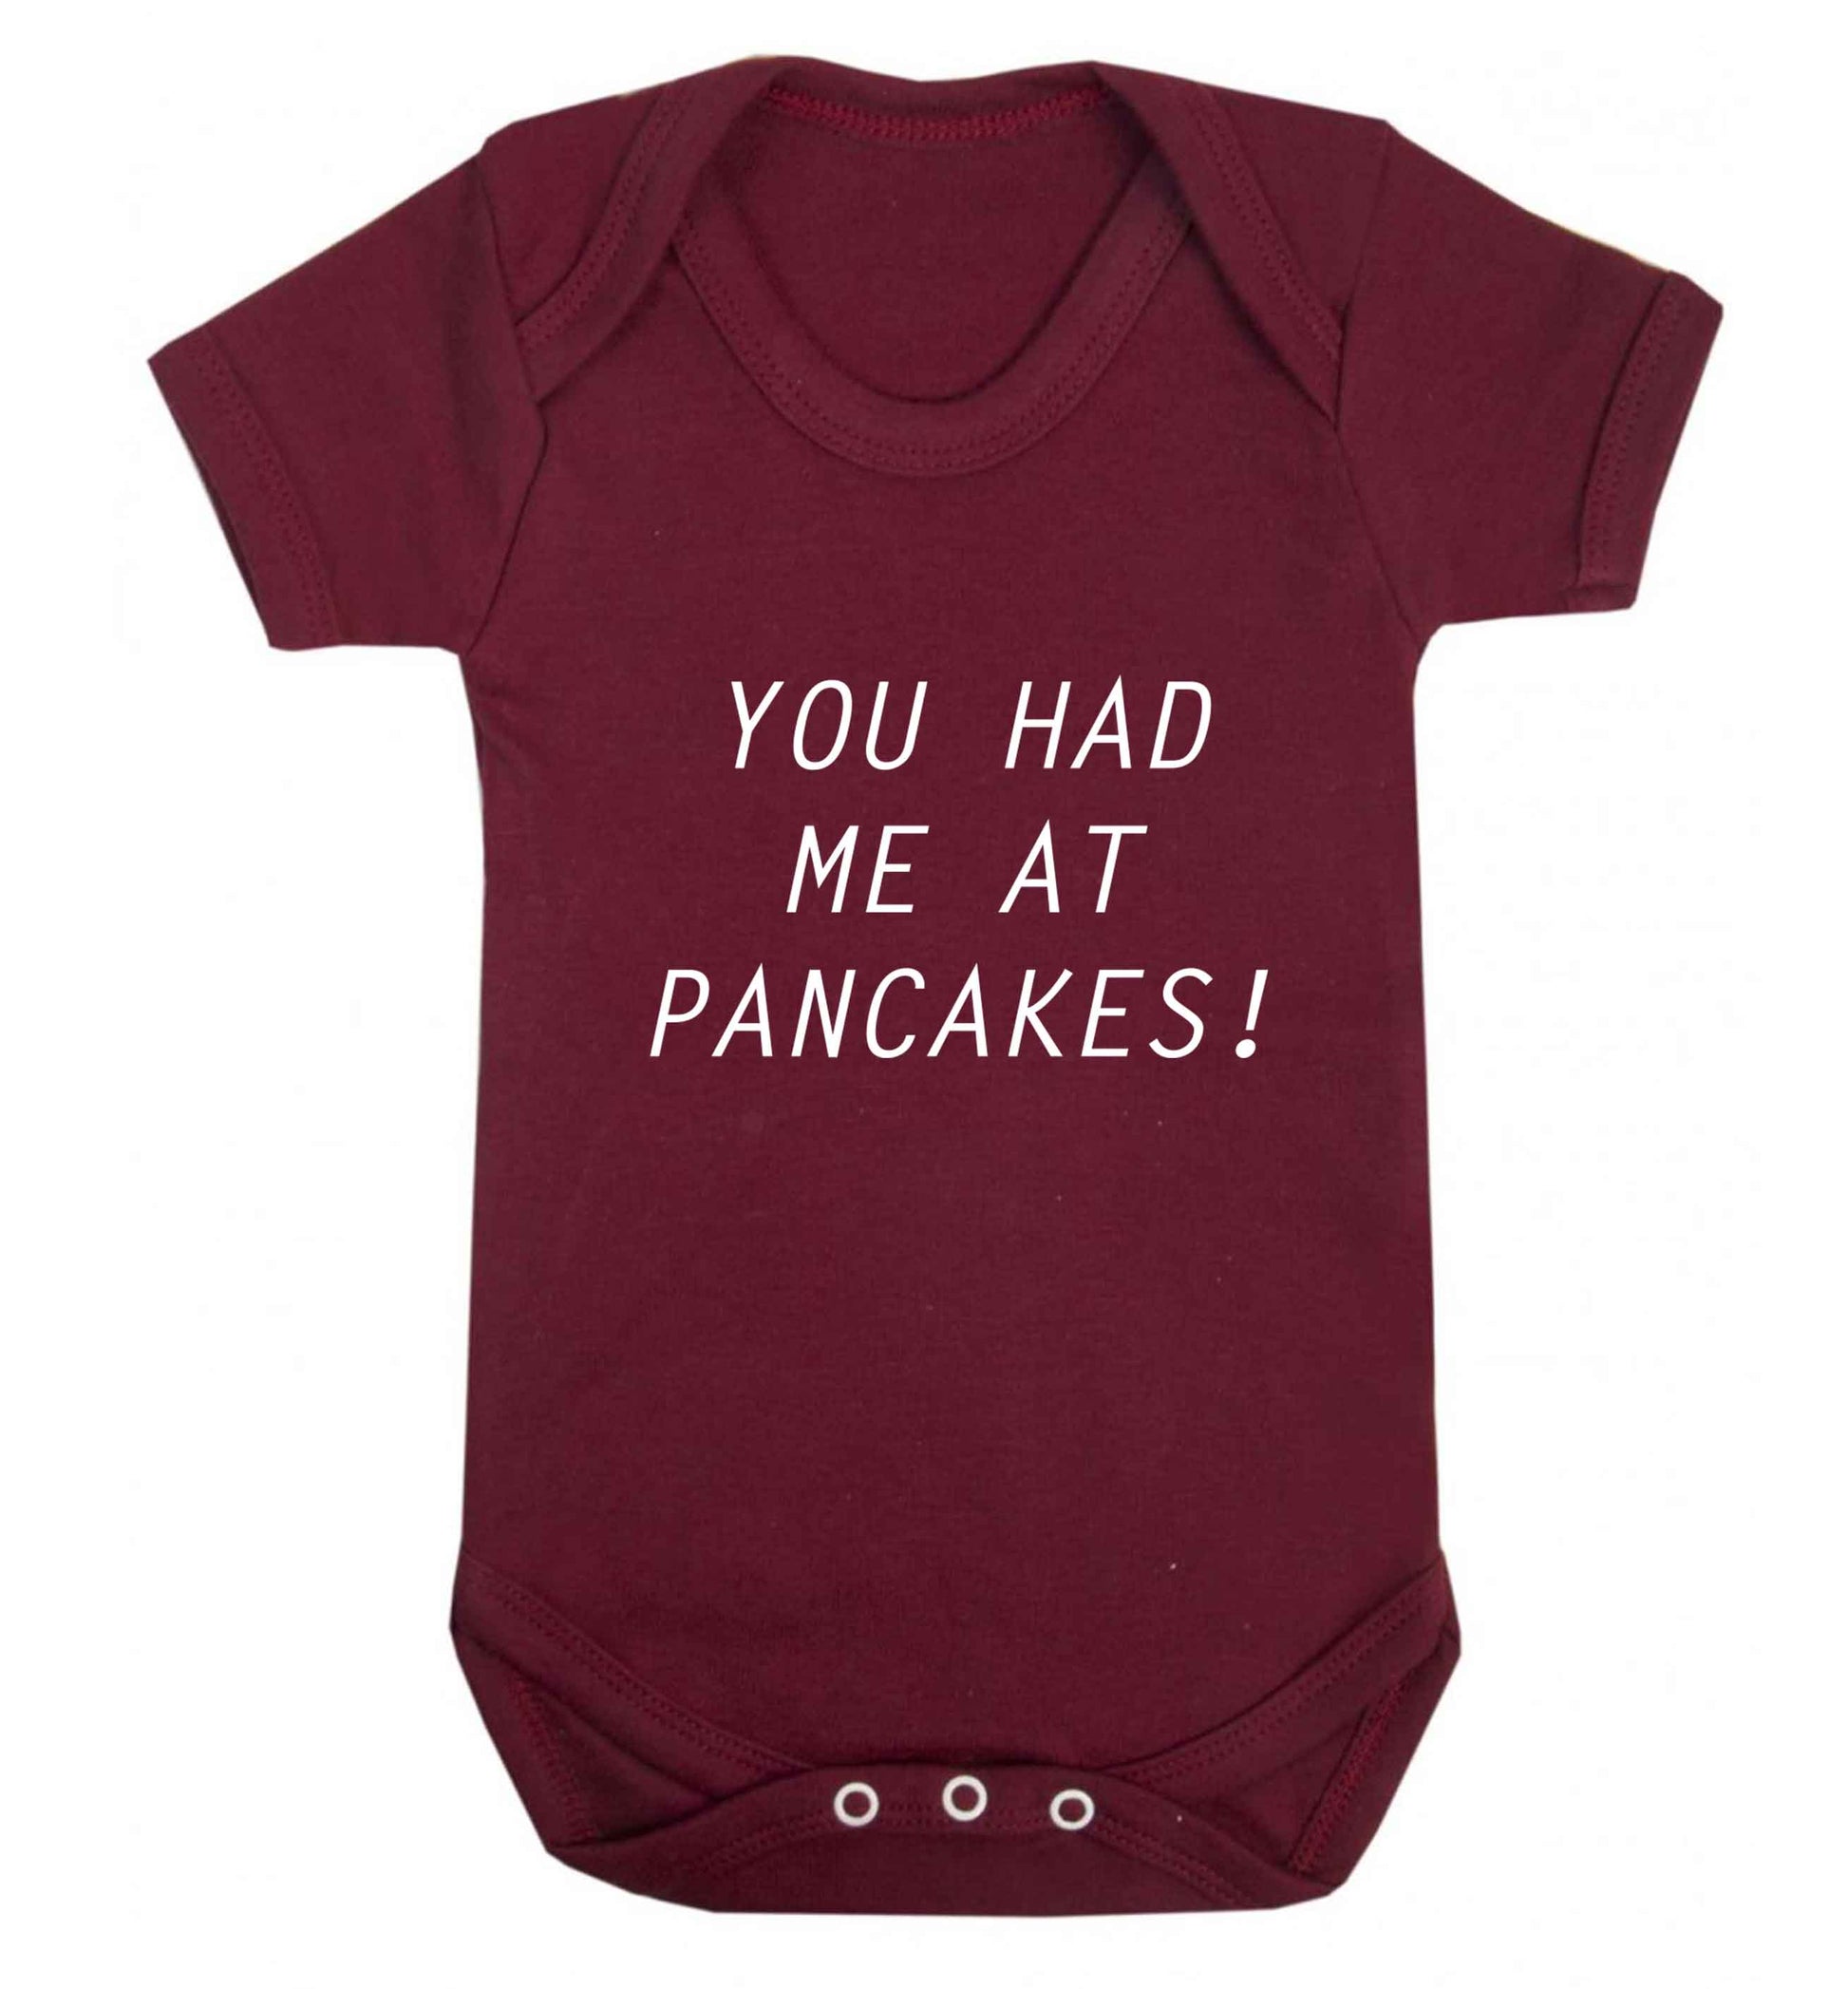 You had me at pancakes baby vest maroon 18-24 months